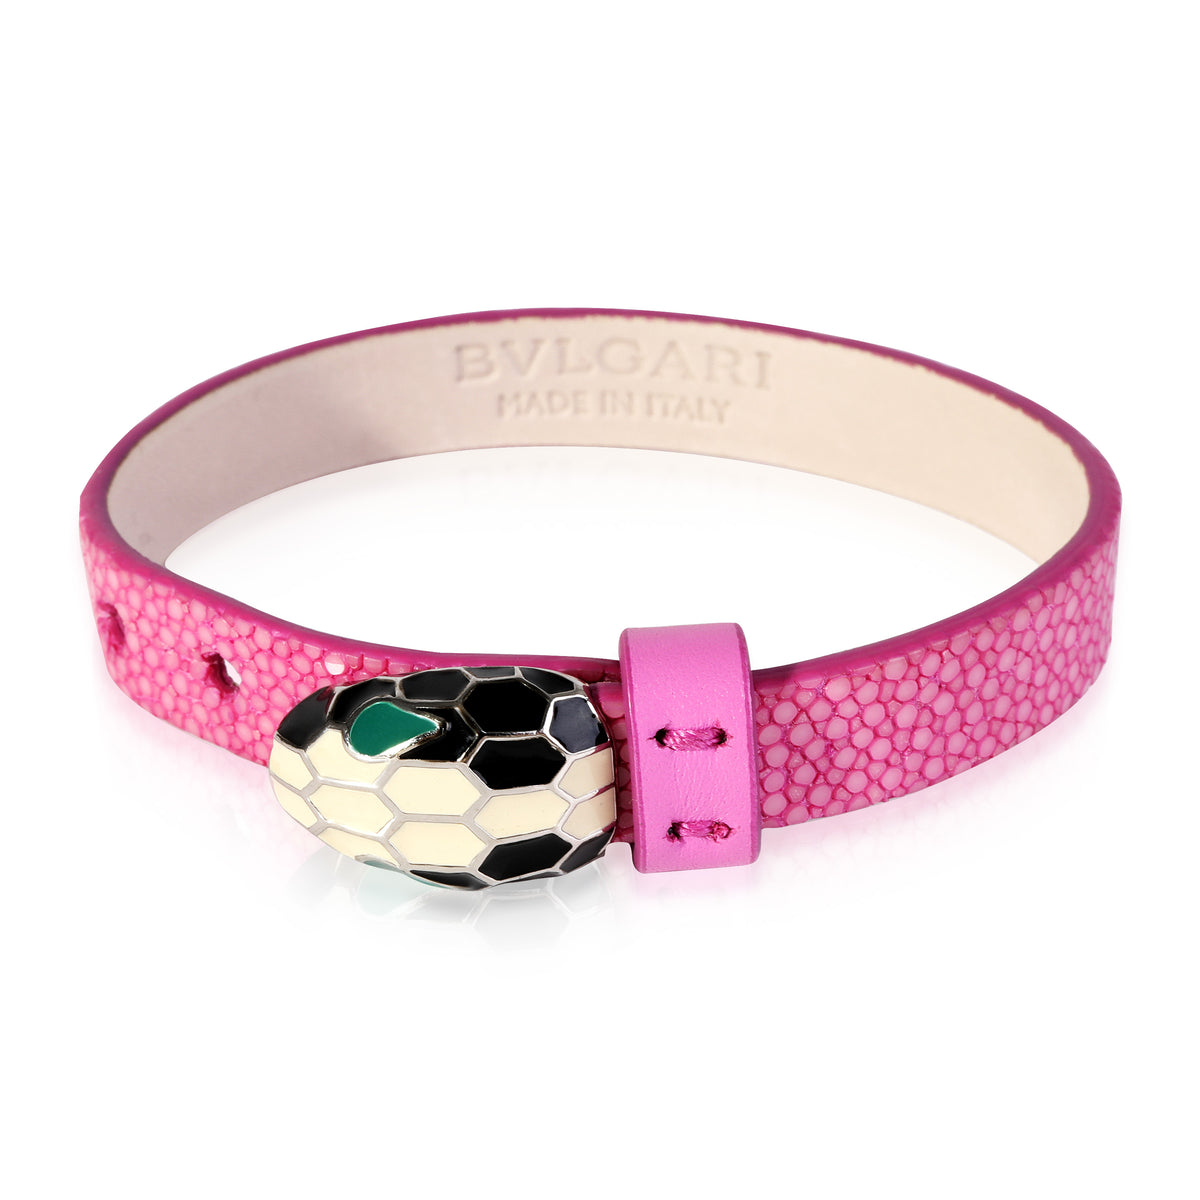 Serpenti Forever Bangle by Bvlgari in Galuchat Skin - Bracelets/Bangles -  Jewellery